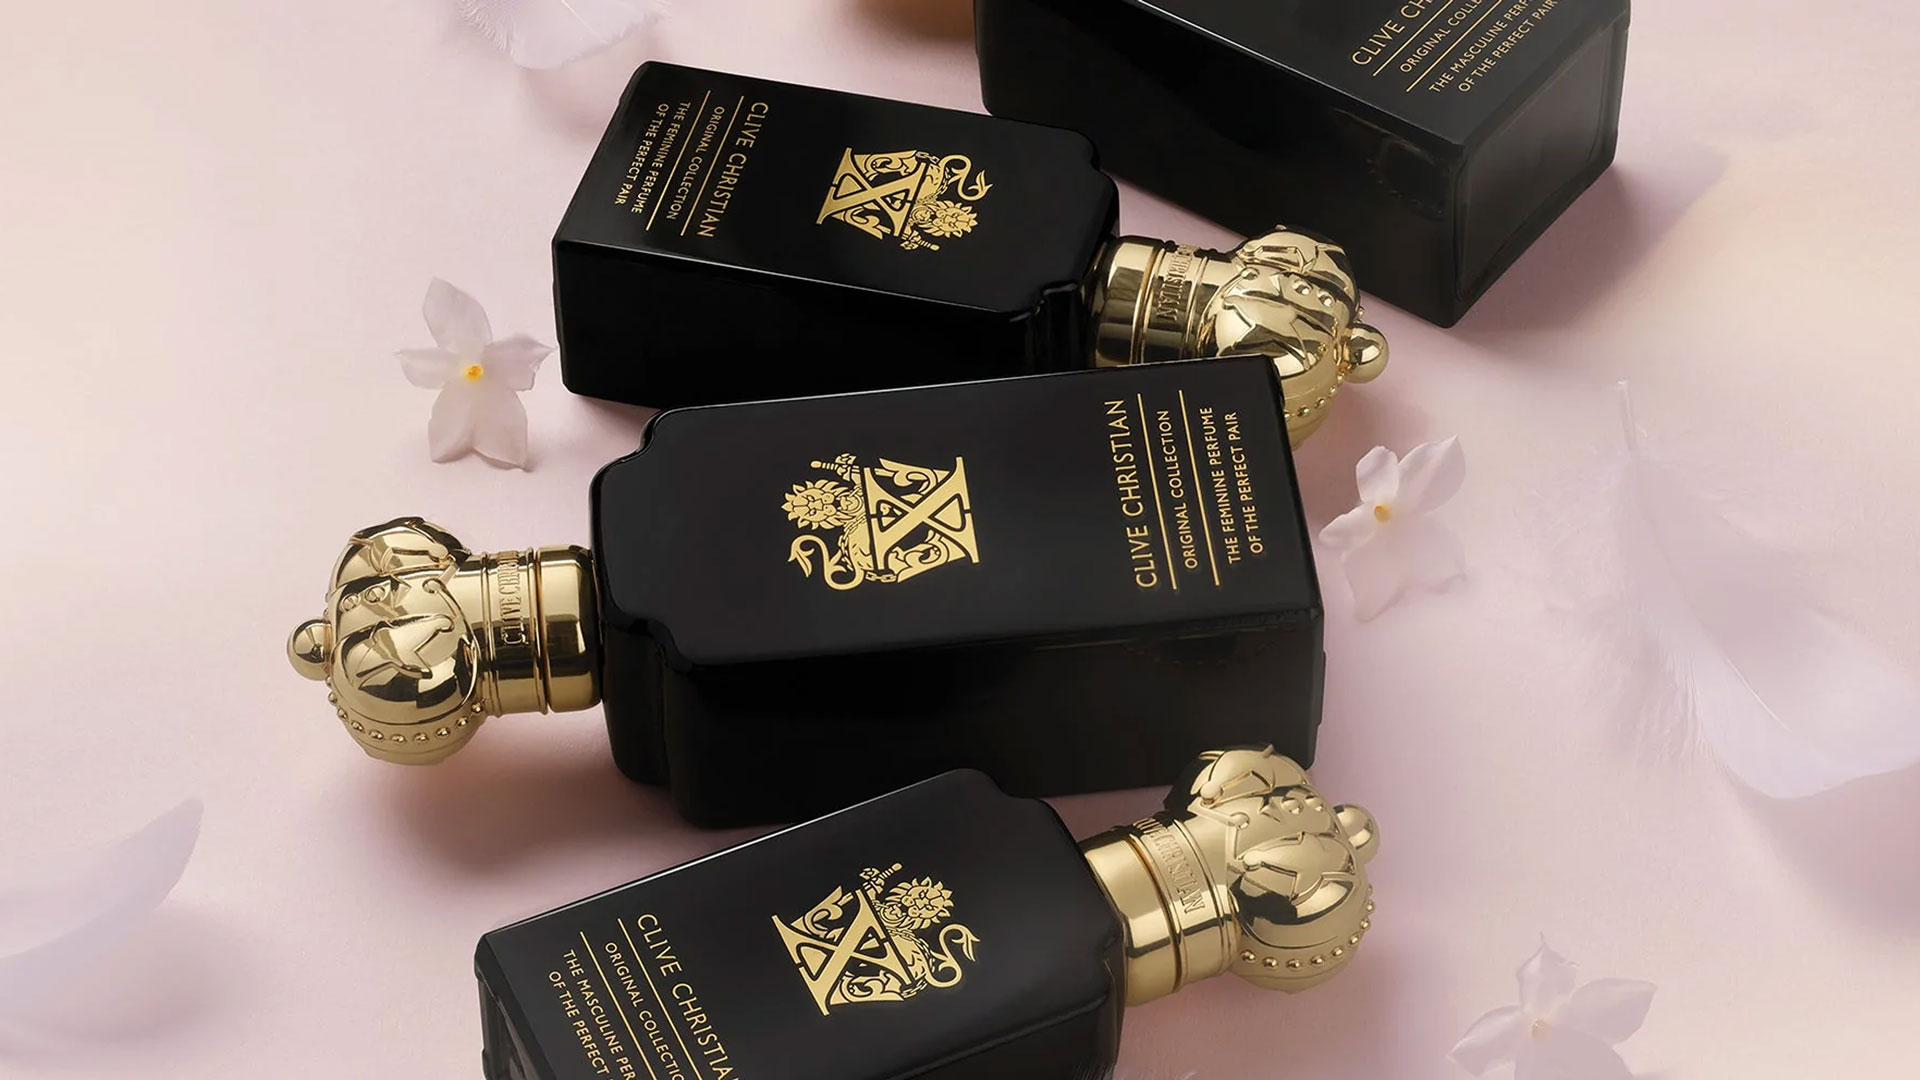 Instantly Elevate Your Look by Applying Clive Christian-Inspired Fragrances